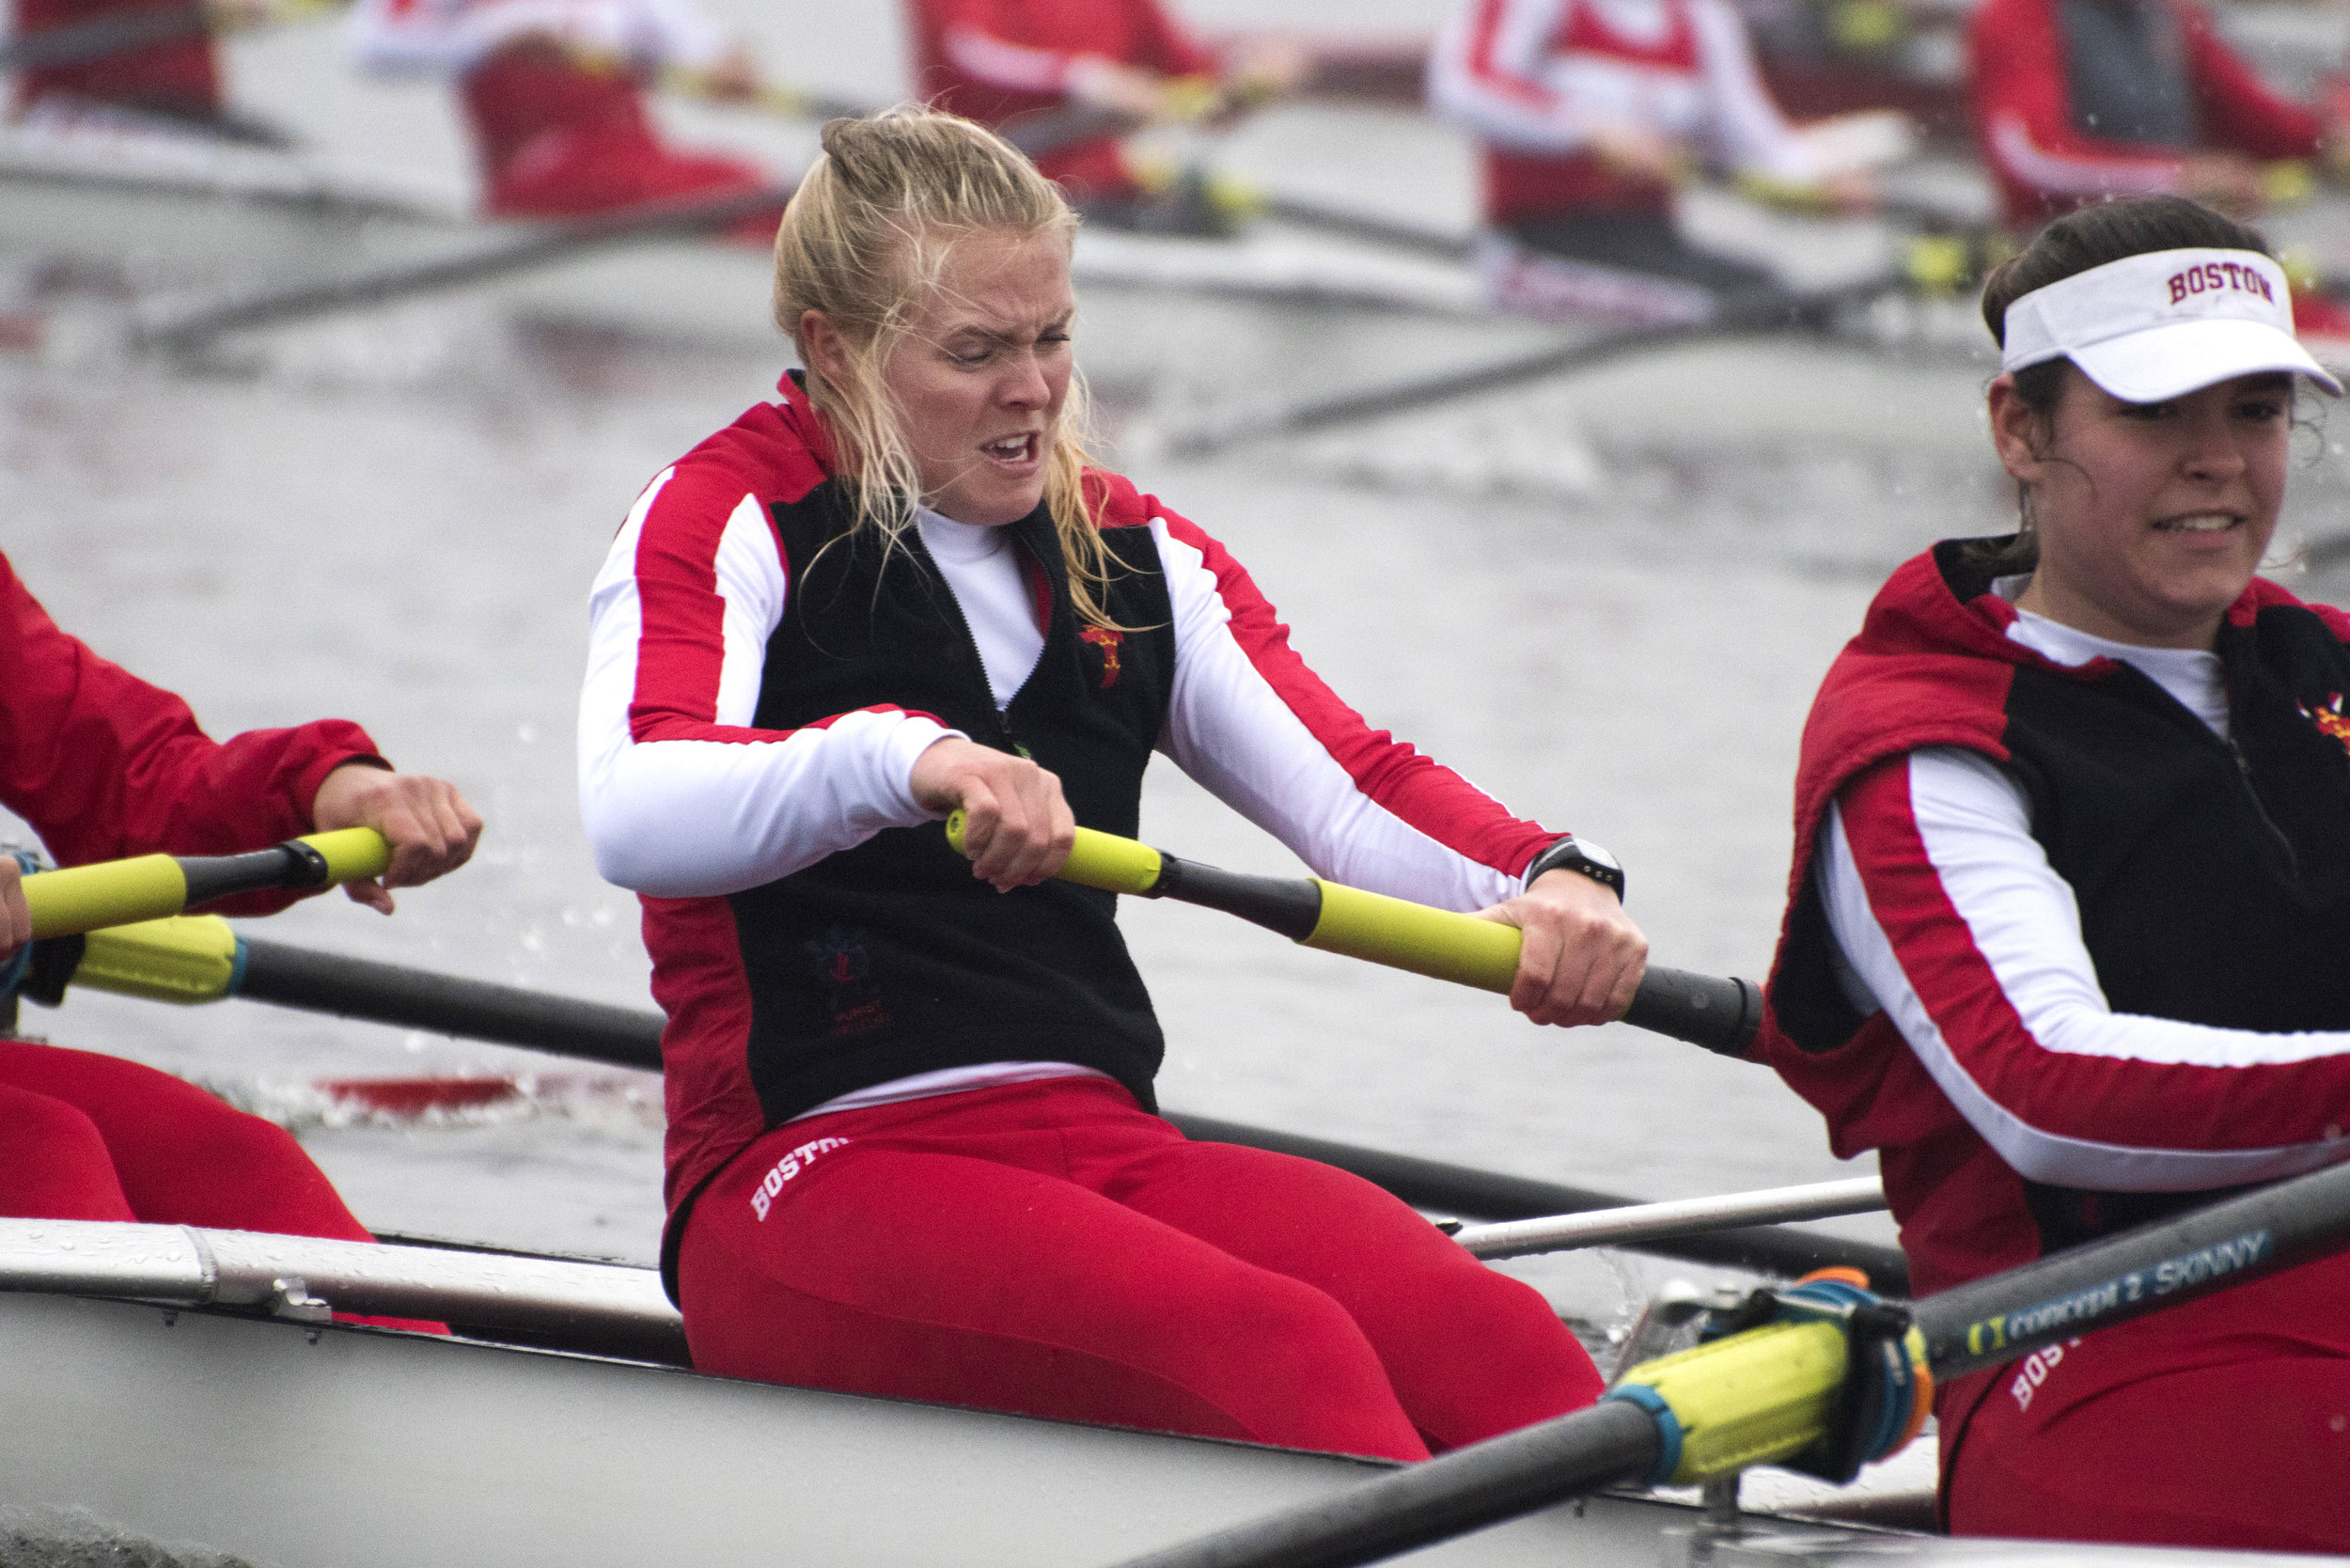  Anna Weis, a member of the Boston University Women's Rowing Team, rows hard during a 1000 meter practice sprint April 4. 